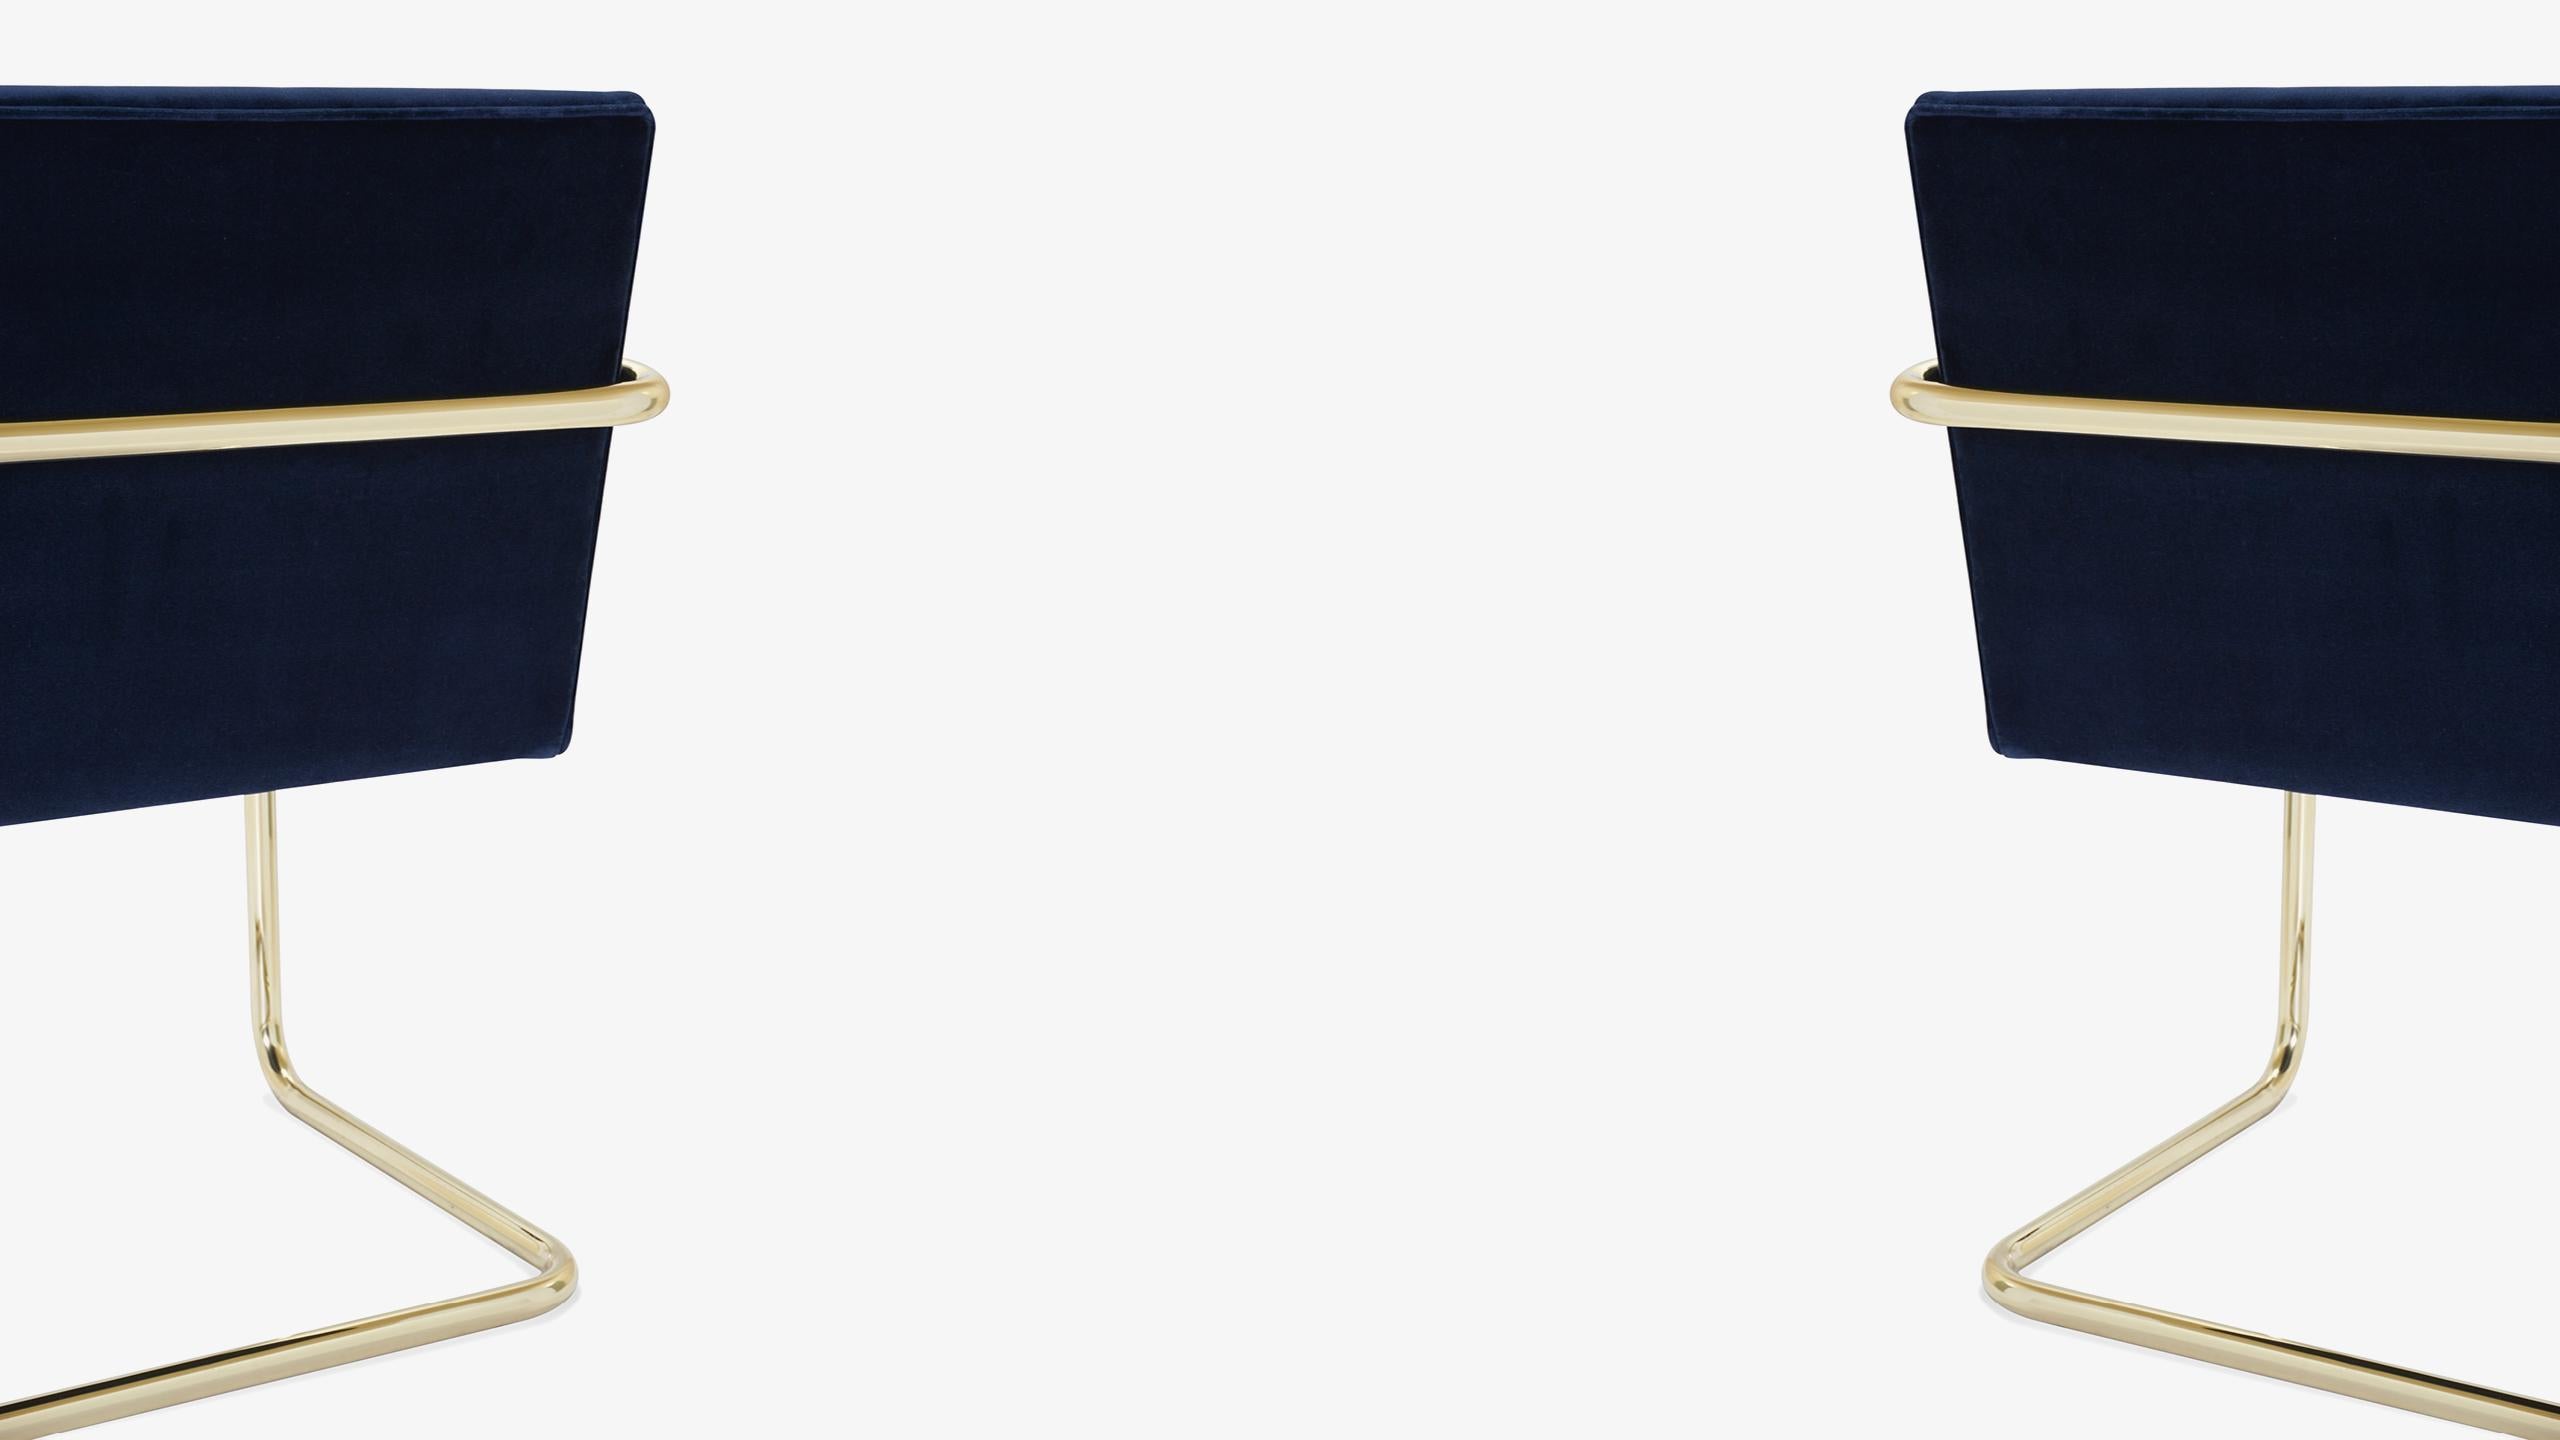 Plated Brno Tubular Chairs in Navy Velvet Polished Brass by Mies Van Der Rohe for Knoll For Sale